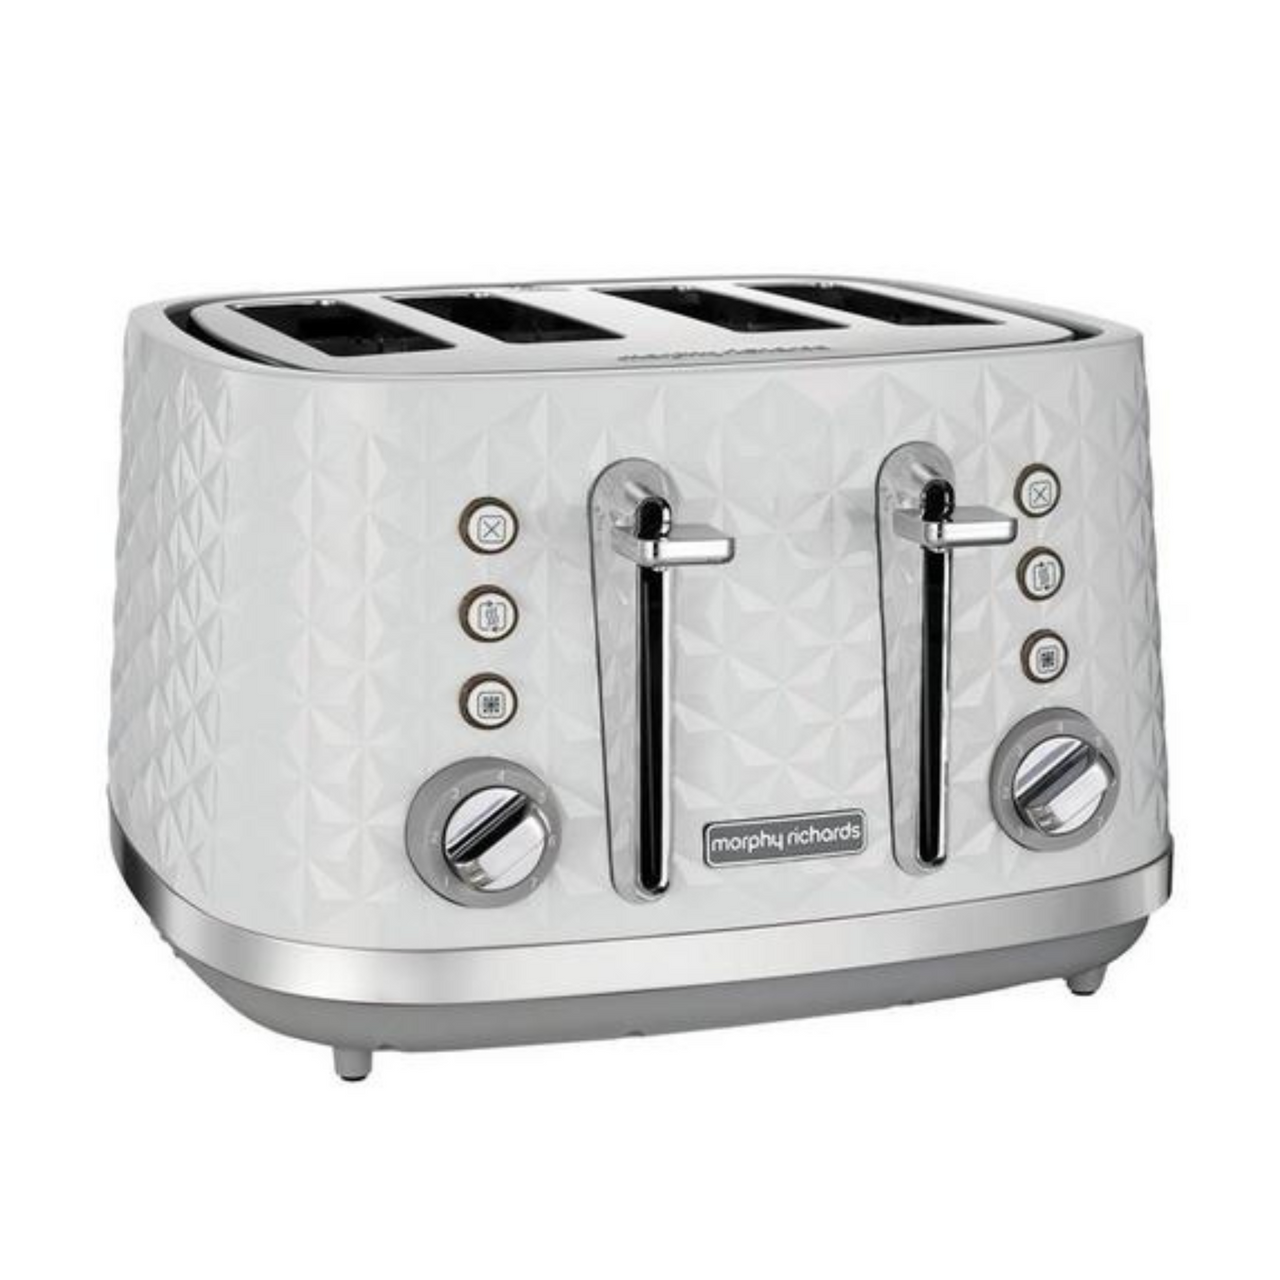 Morphy Richards Vector 4 Slice Toaster in White with Patterned 3D Finish 248134